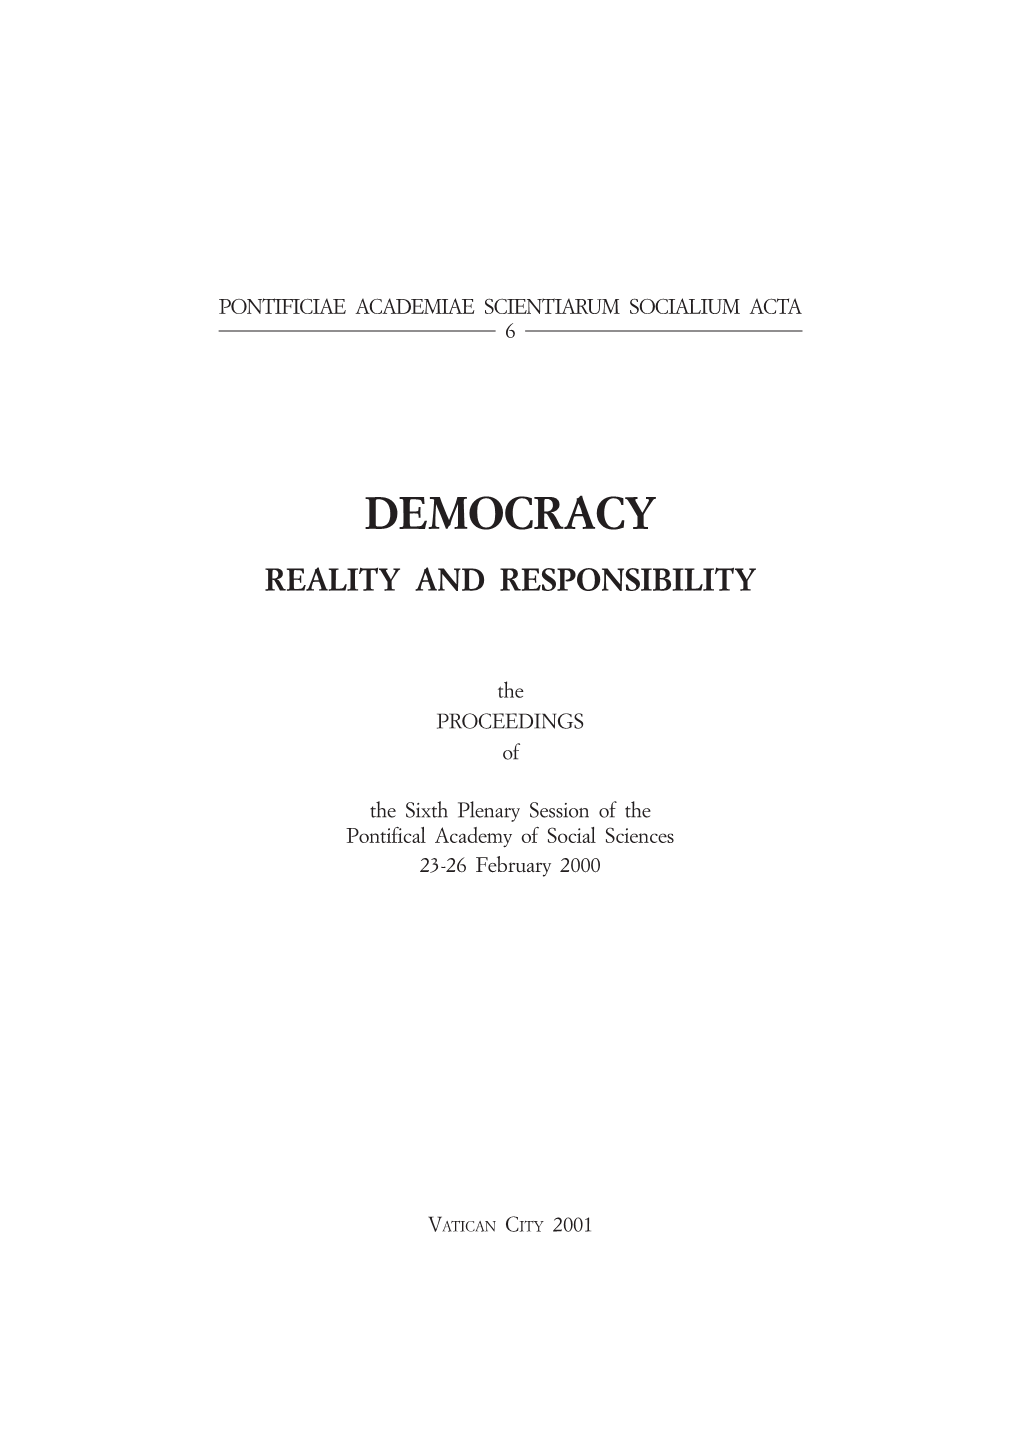 Democracy Reality and Responsibility